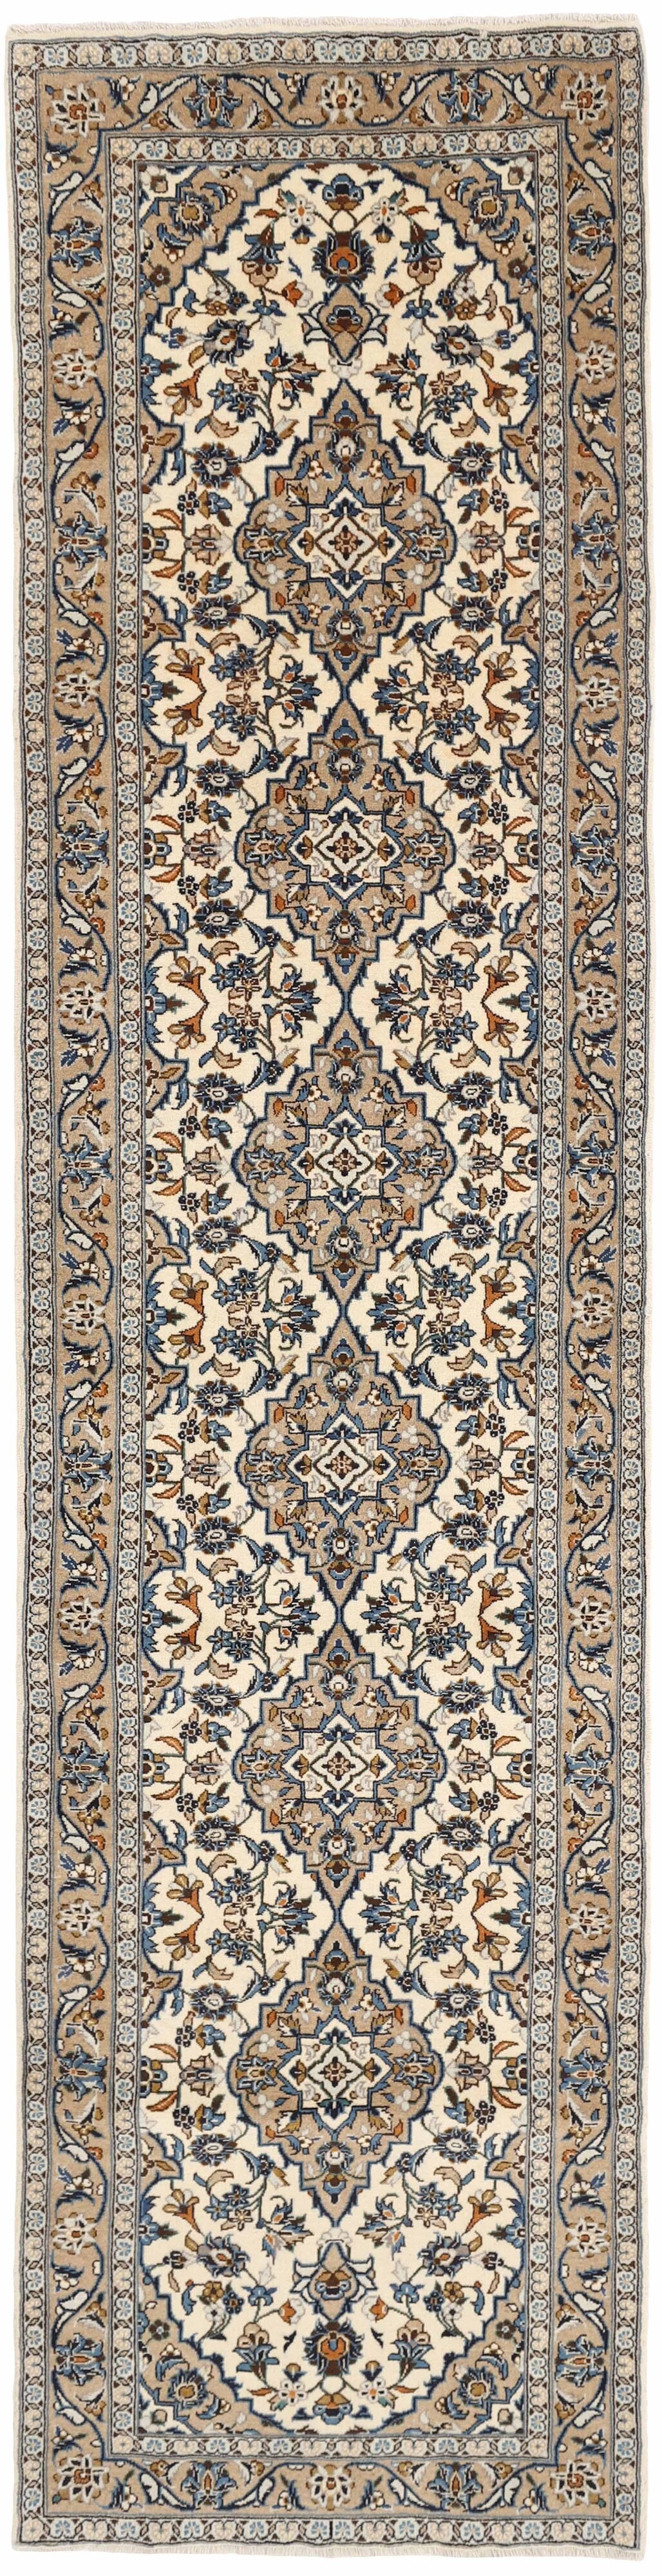 Authentic persian rug with traditional floral design in cream and blue